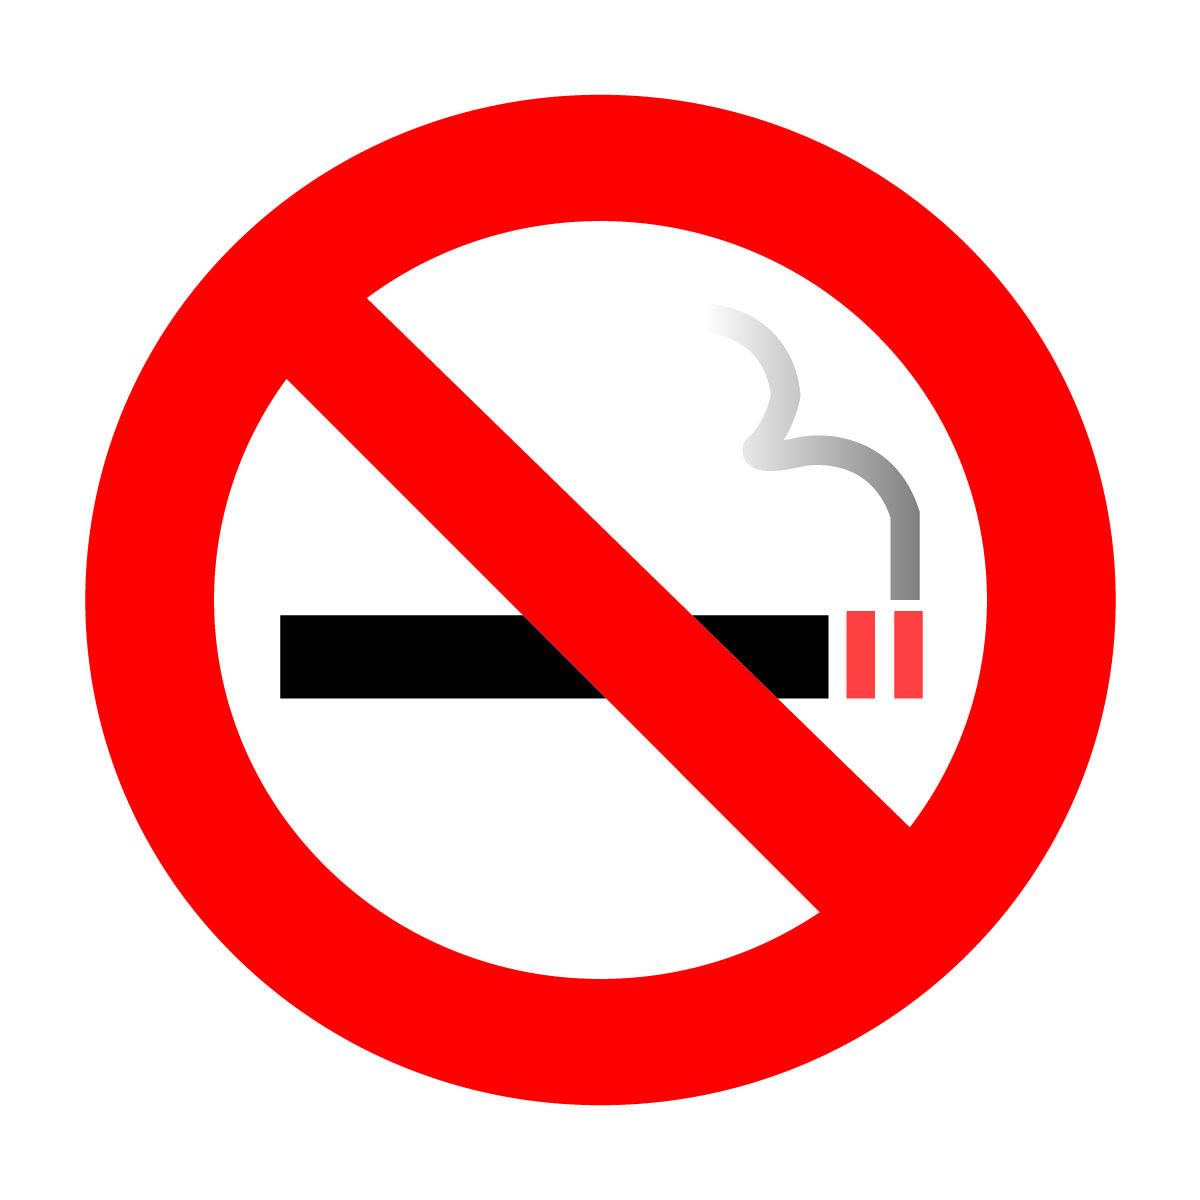 Pictures Of No Smoking Signs - ClipArt Best